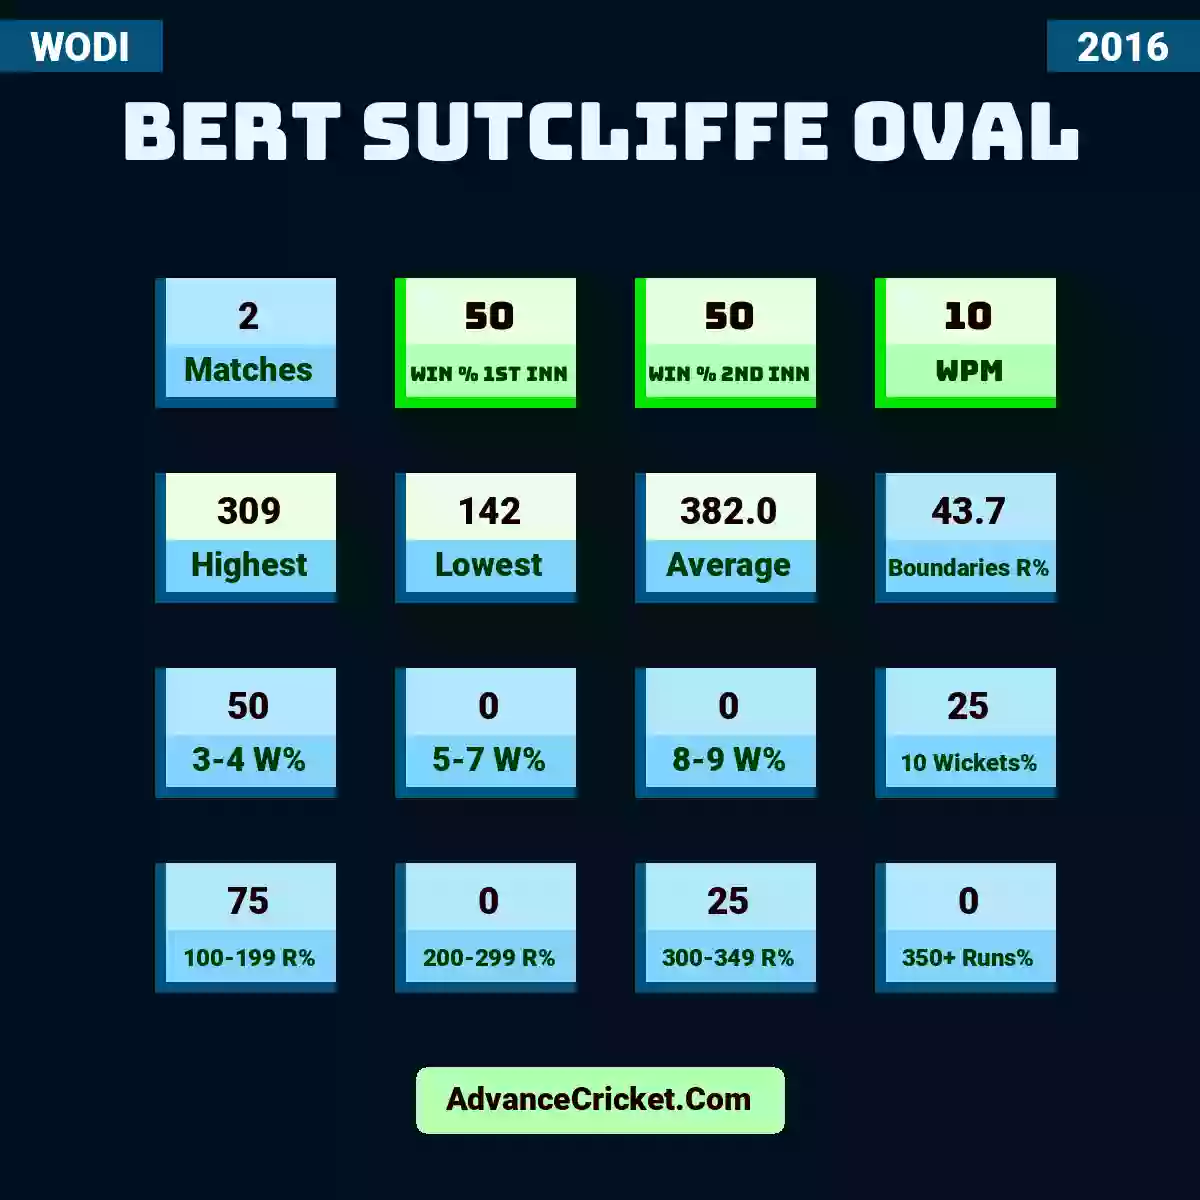 Image showing Bert Sutcliffe Oval with Matches: 2, Win % 1st Inn: 50, Win % 2nd Inn: 50, WPM: 10, Highest: 309, Lowest: 142, Average: 382.0, Boundaries R%: 43.7, 3-4 W%: 50, 5-7 W%: 0, 8-9 W%: 0, 10 Wickets%: 25, 100-199 R%: 75, 200-299 R%: 0, 300-349 R%: 25, 350+ Runs%: 0.